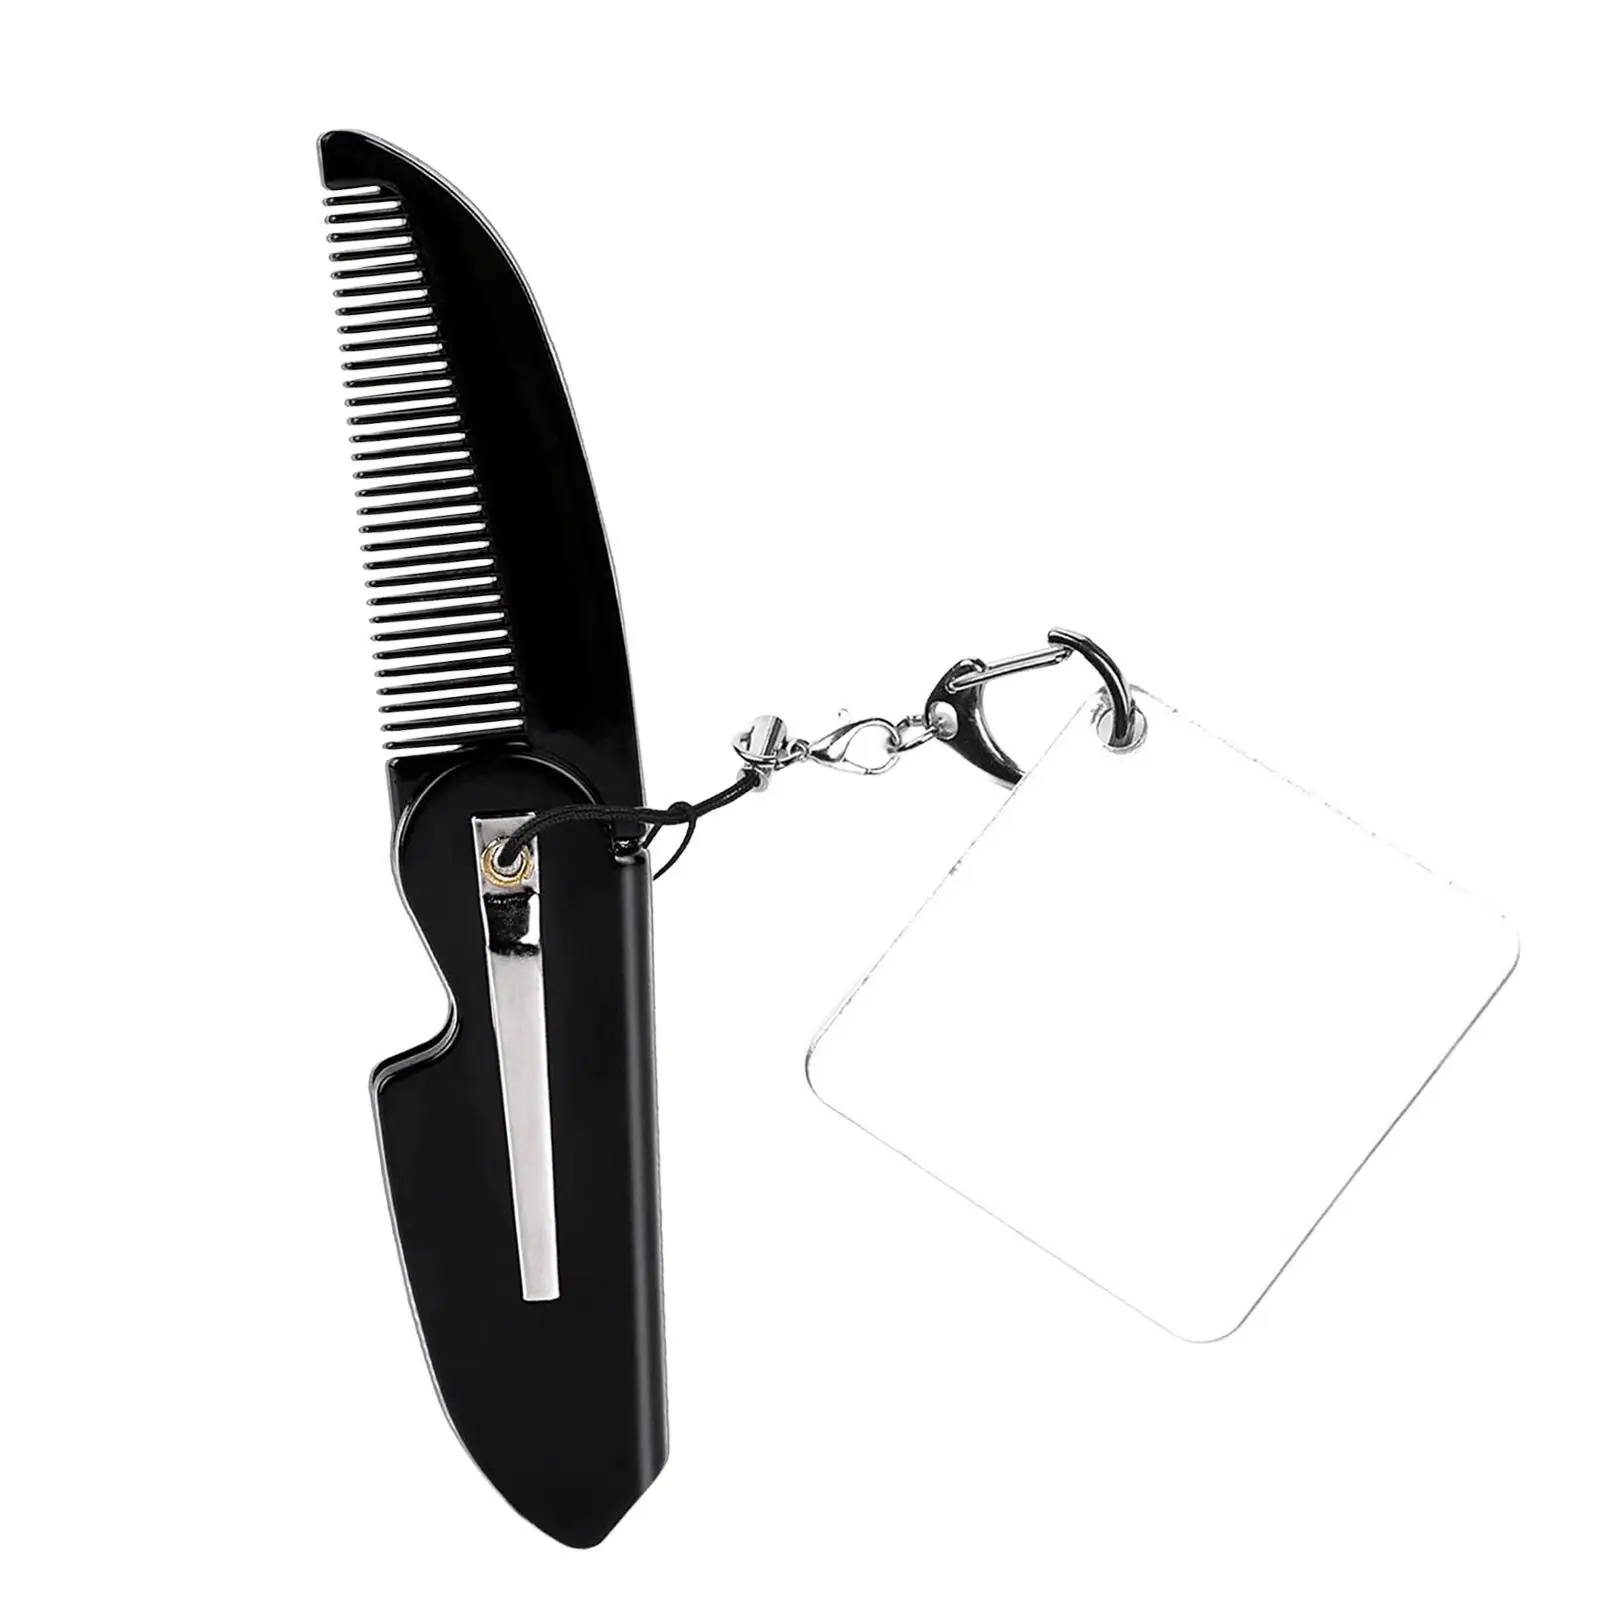 Folding Pocket Beard Comb Accessory Durable Everyday Grooming Styling Hair Easy to Use Hair Comb with Mirror with Keychain